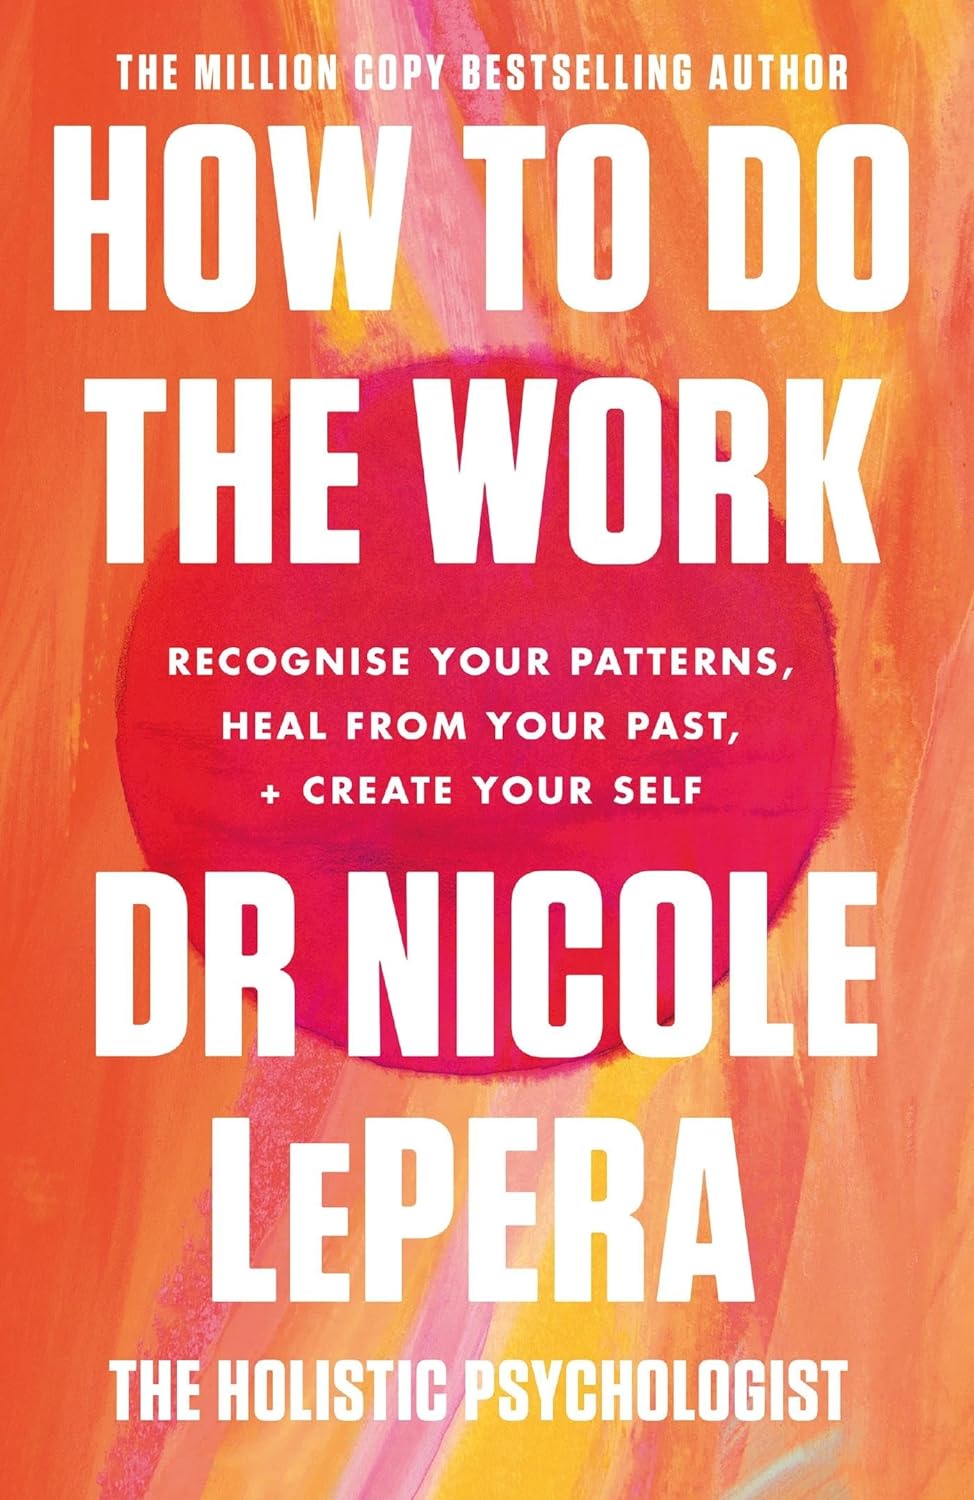 'How to Do the Work' by Dr. Nicole LaPera